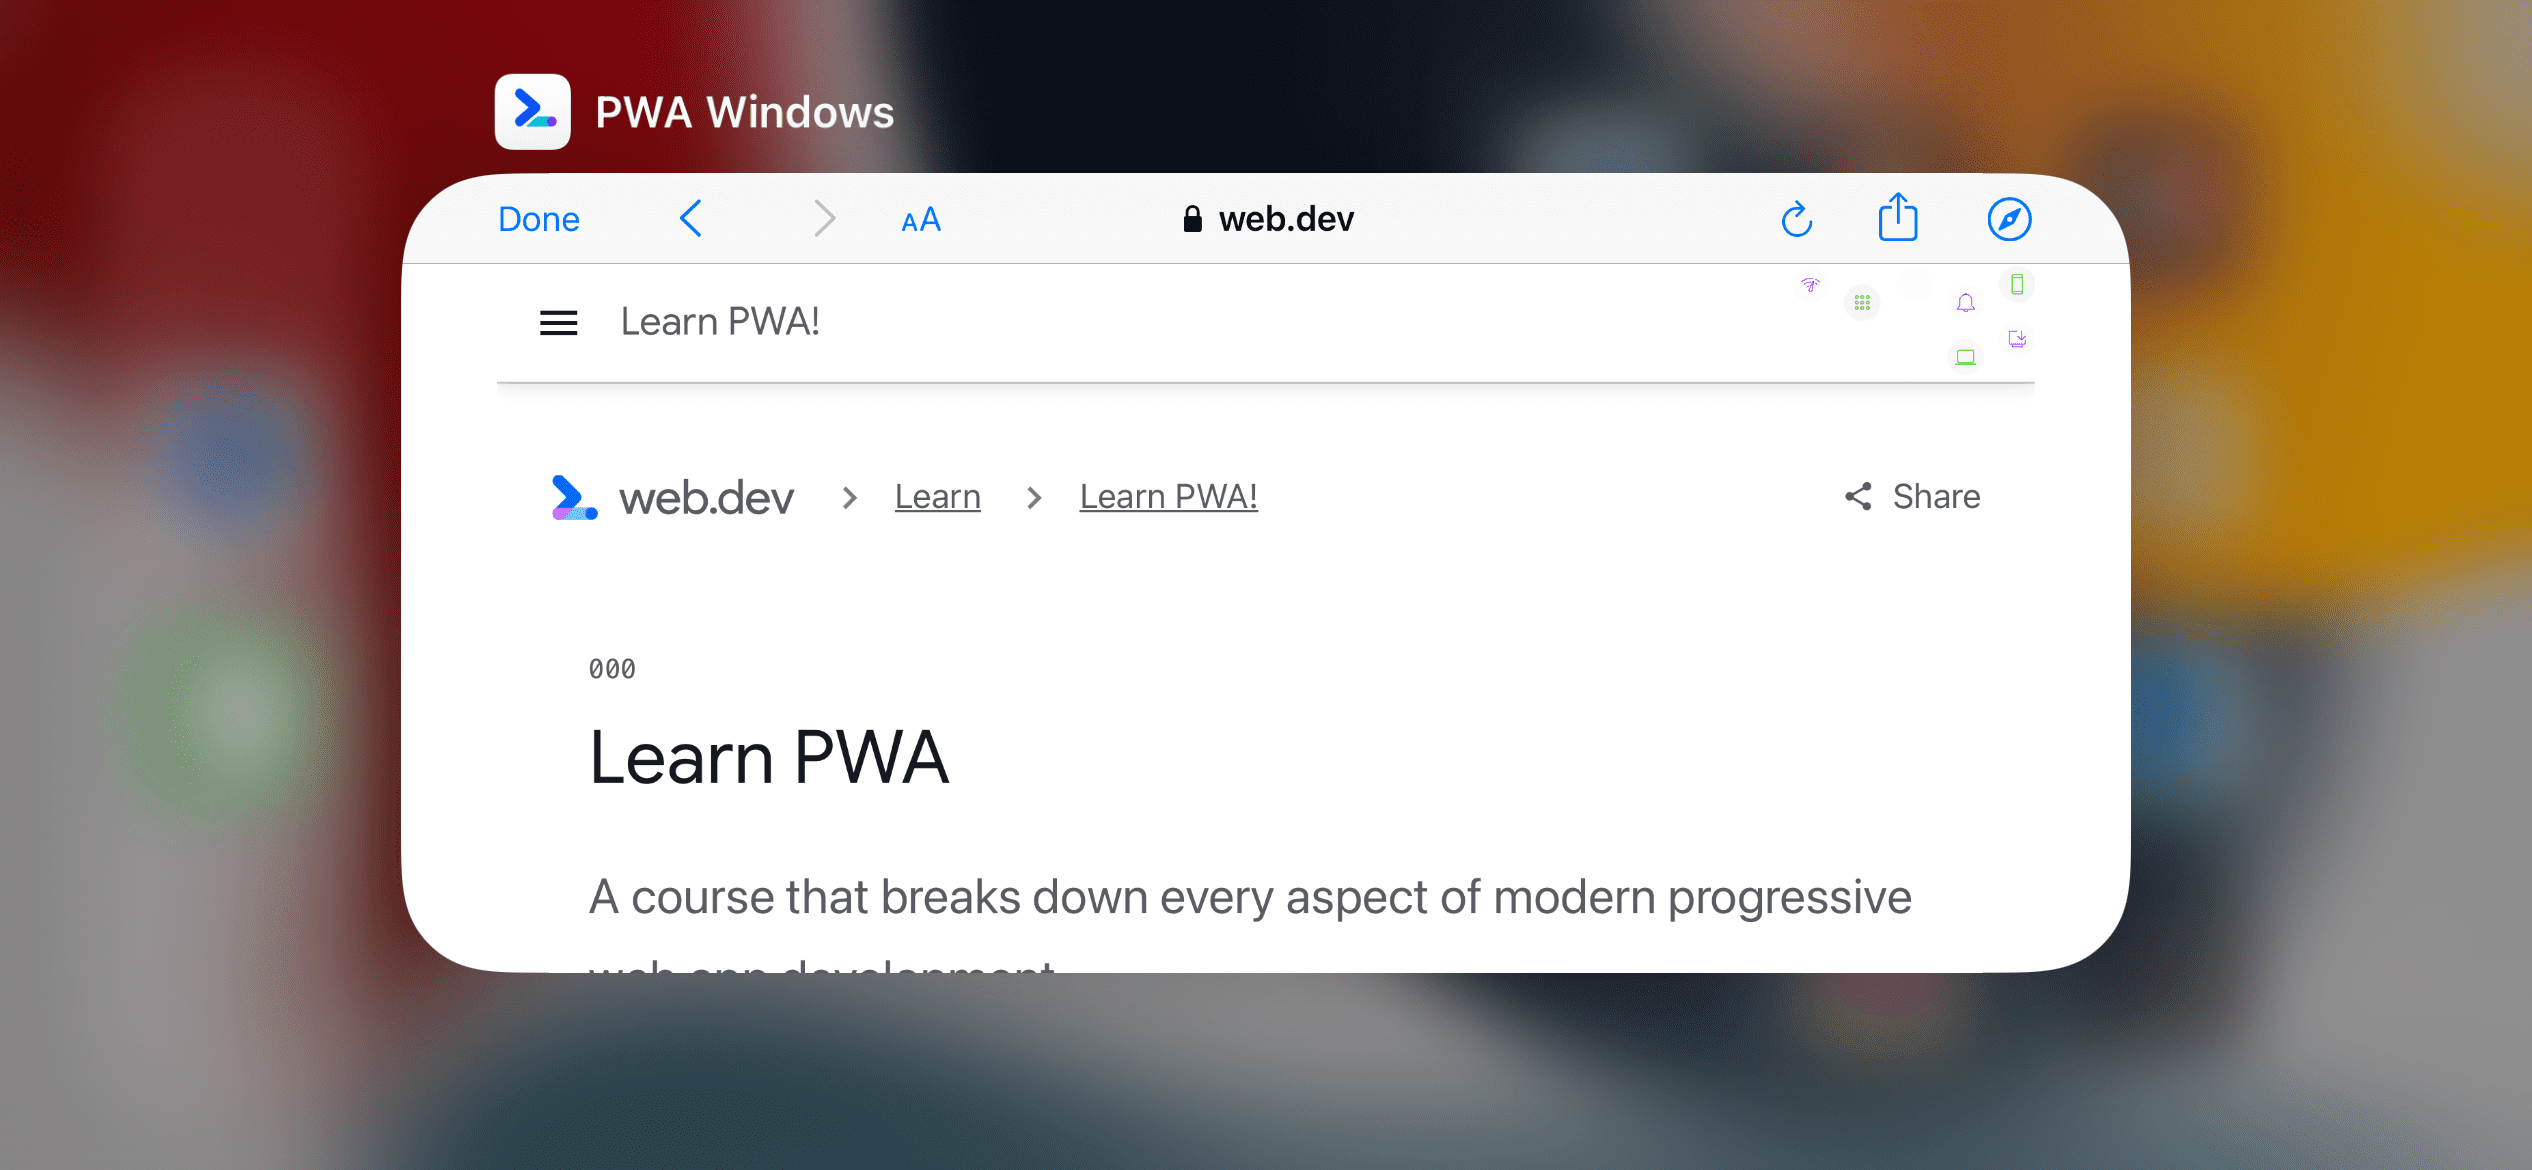 An in-app browser on an iPhone when browsing a URL that is out-of-scope within a standalone PWA.